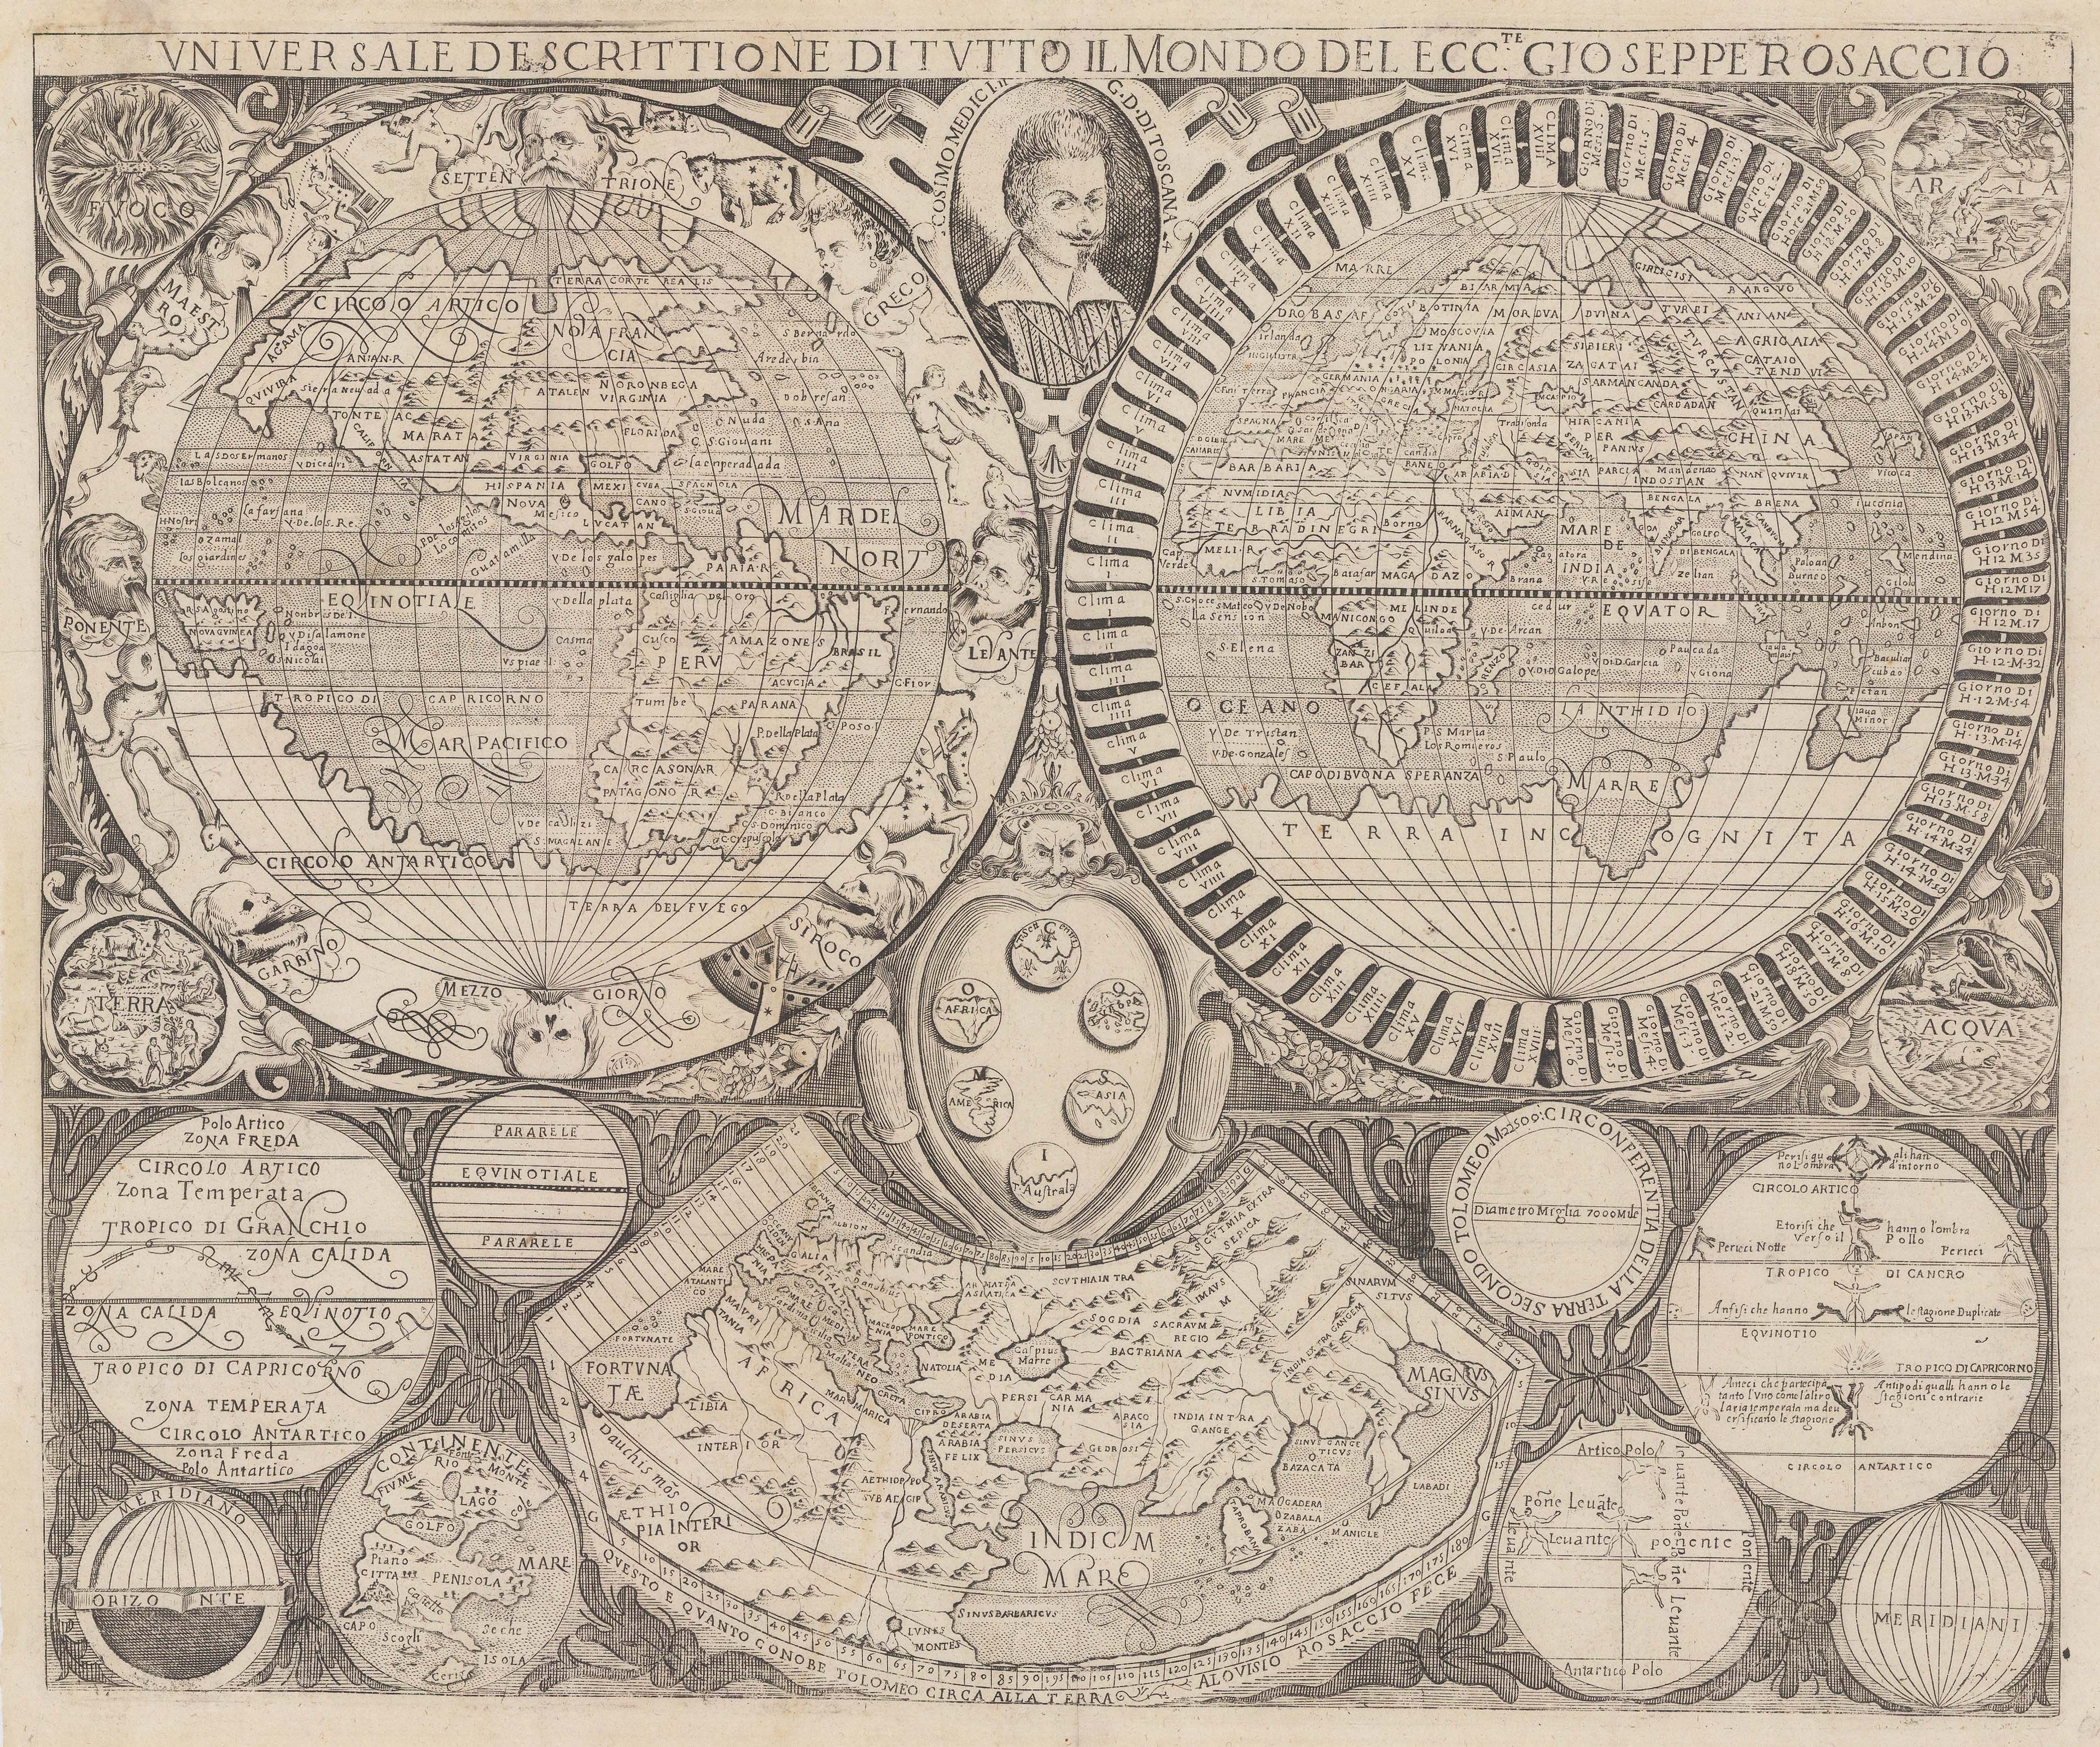 Preview of the map of the world by Giuseppe Rosaccio with illustrations around the Earth